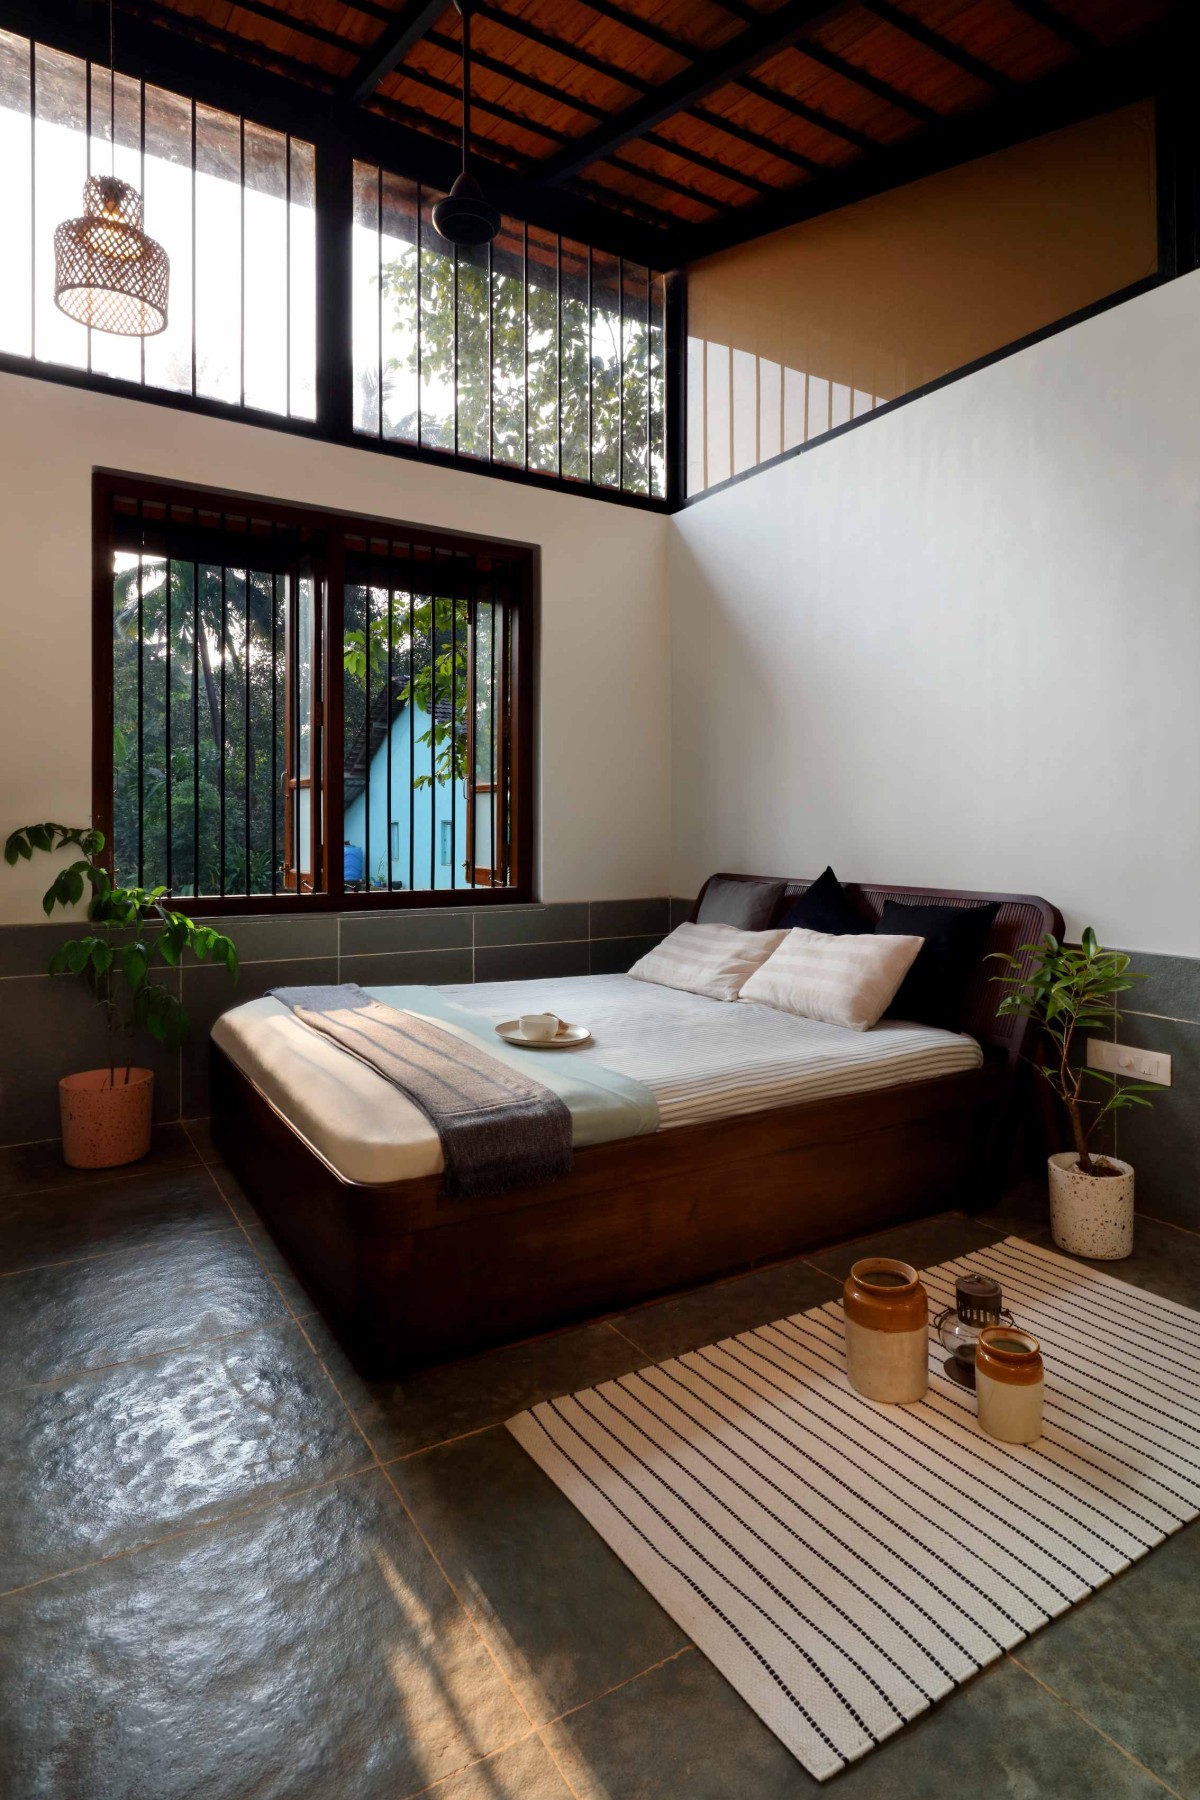 Bedroom of Lanja House by Articulated Design Initiative